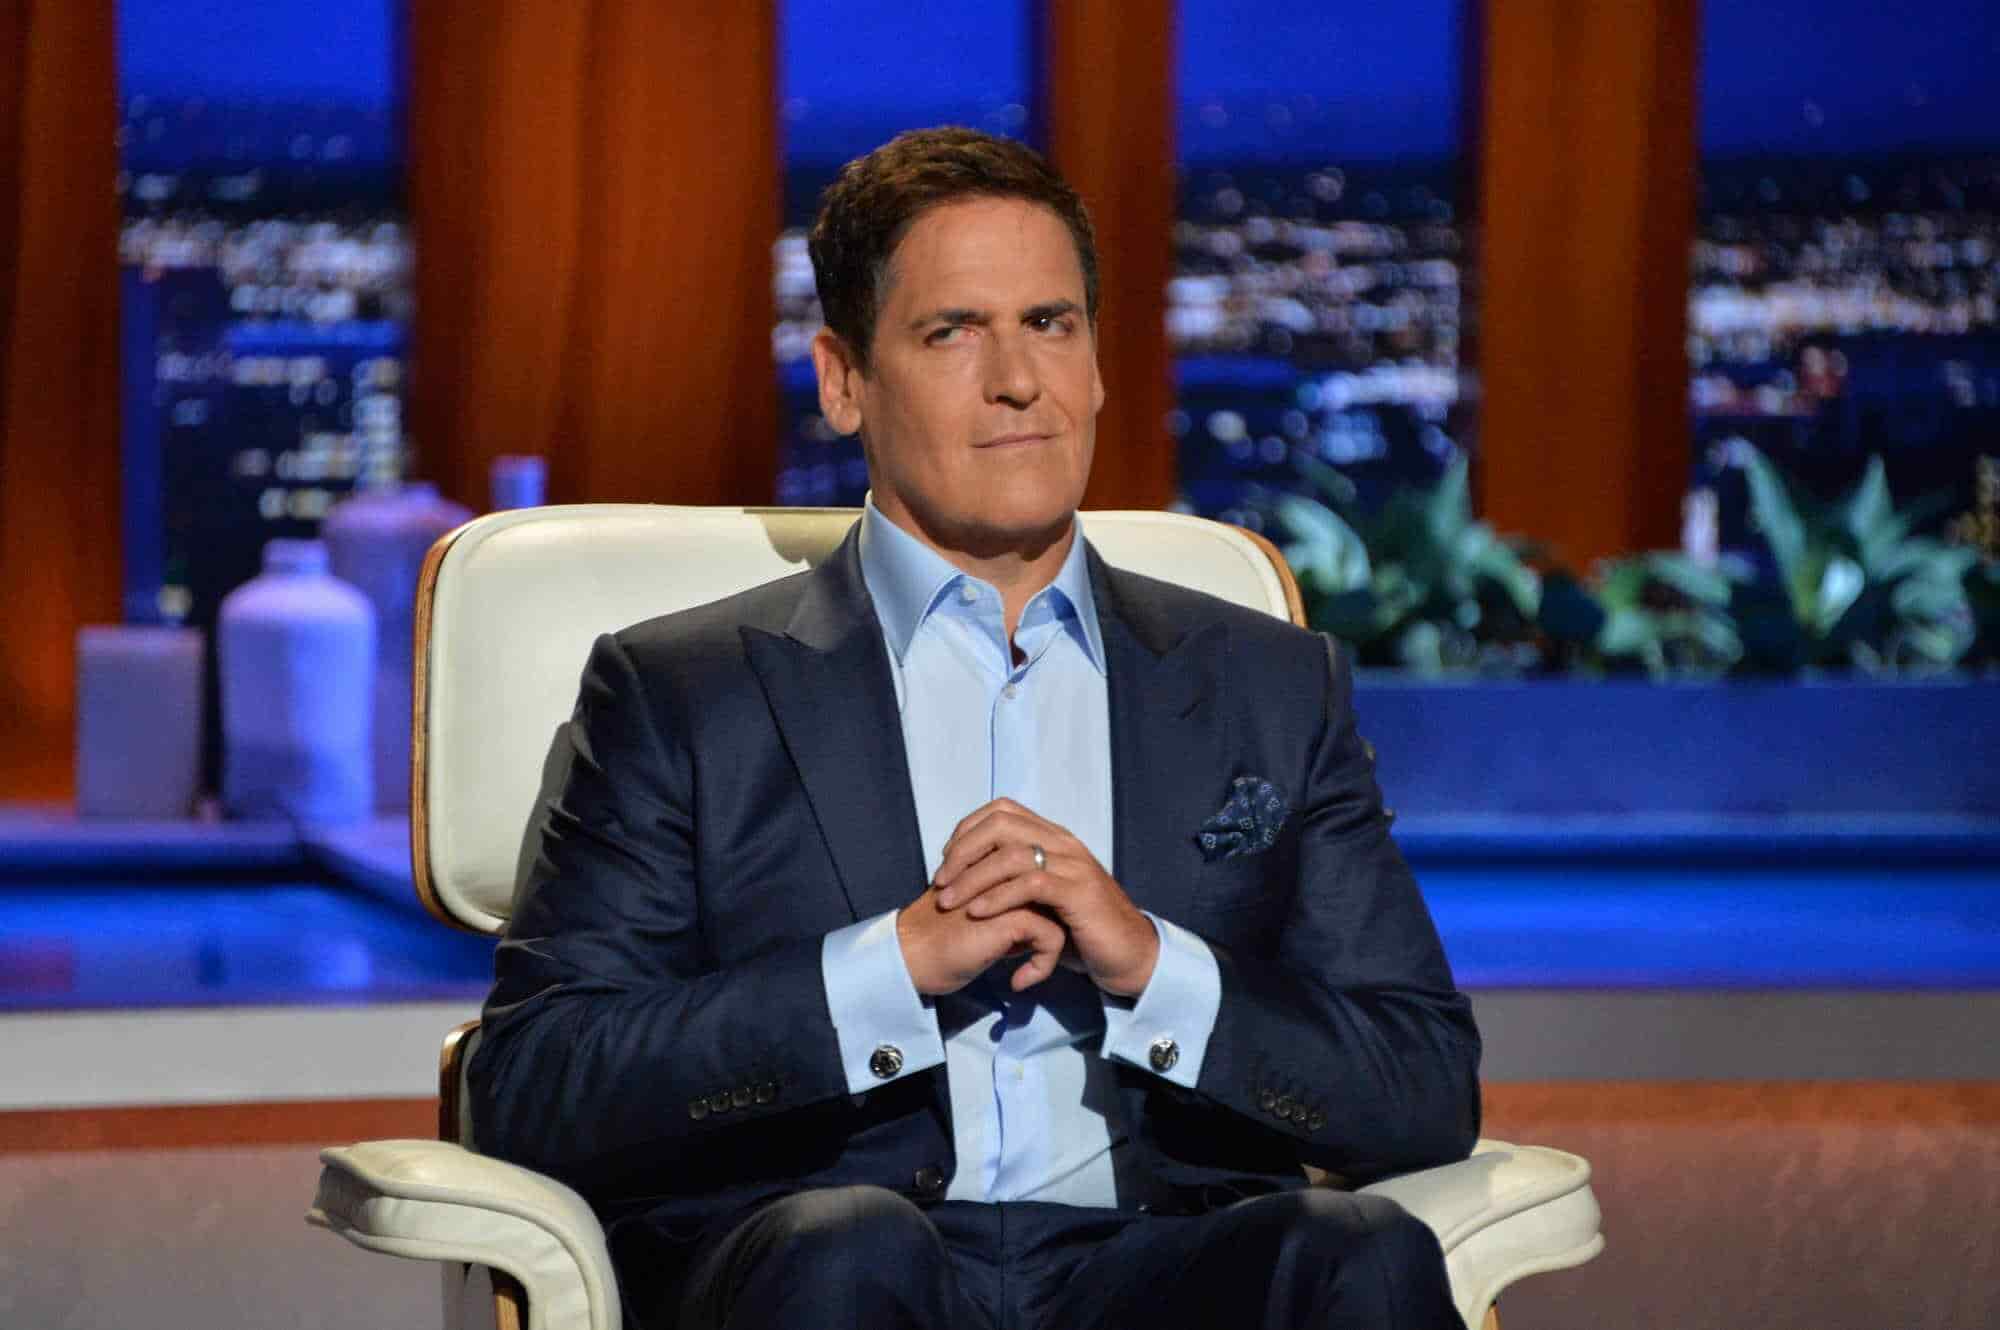 Image of Mark Cuban after his weight loss